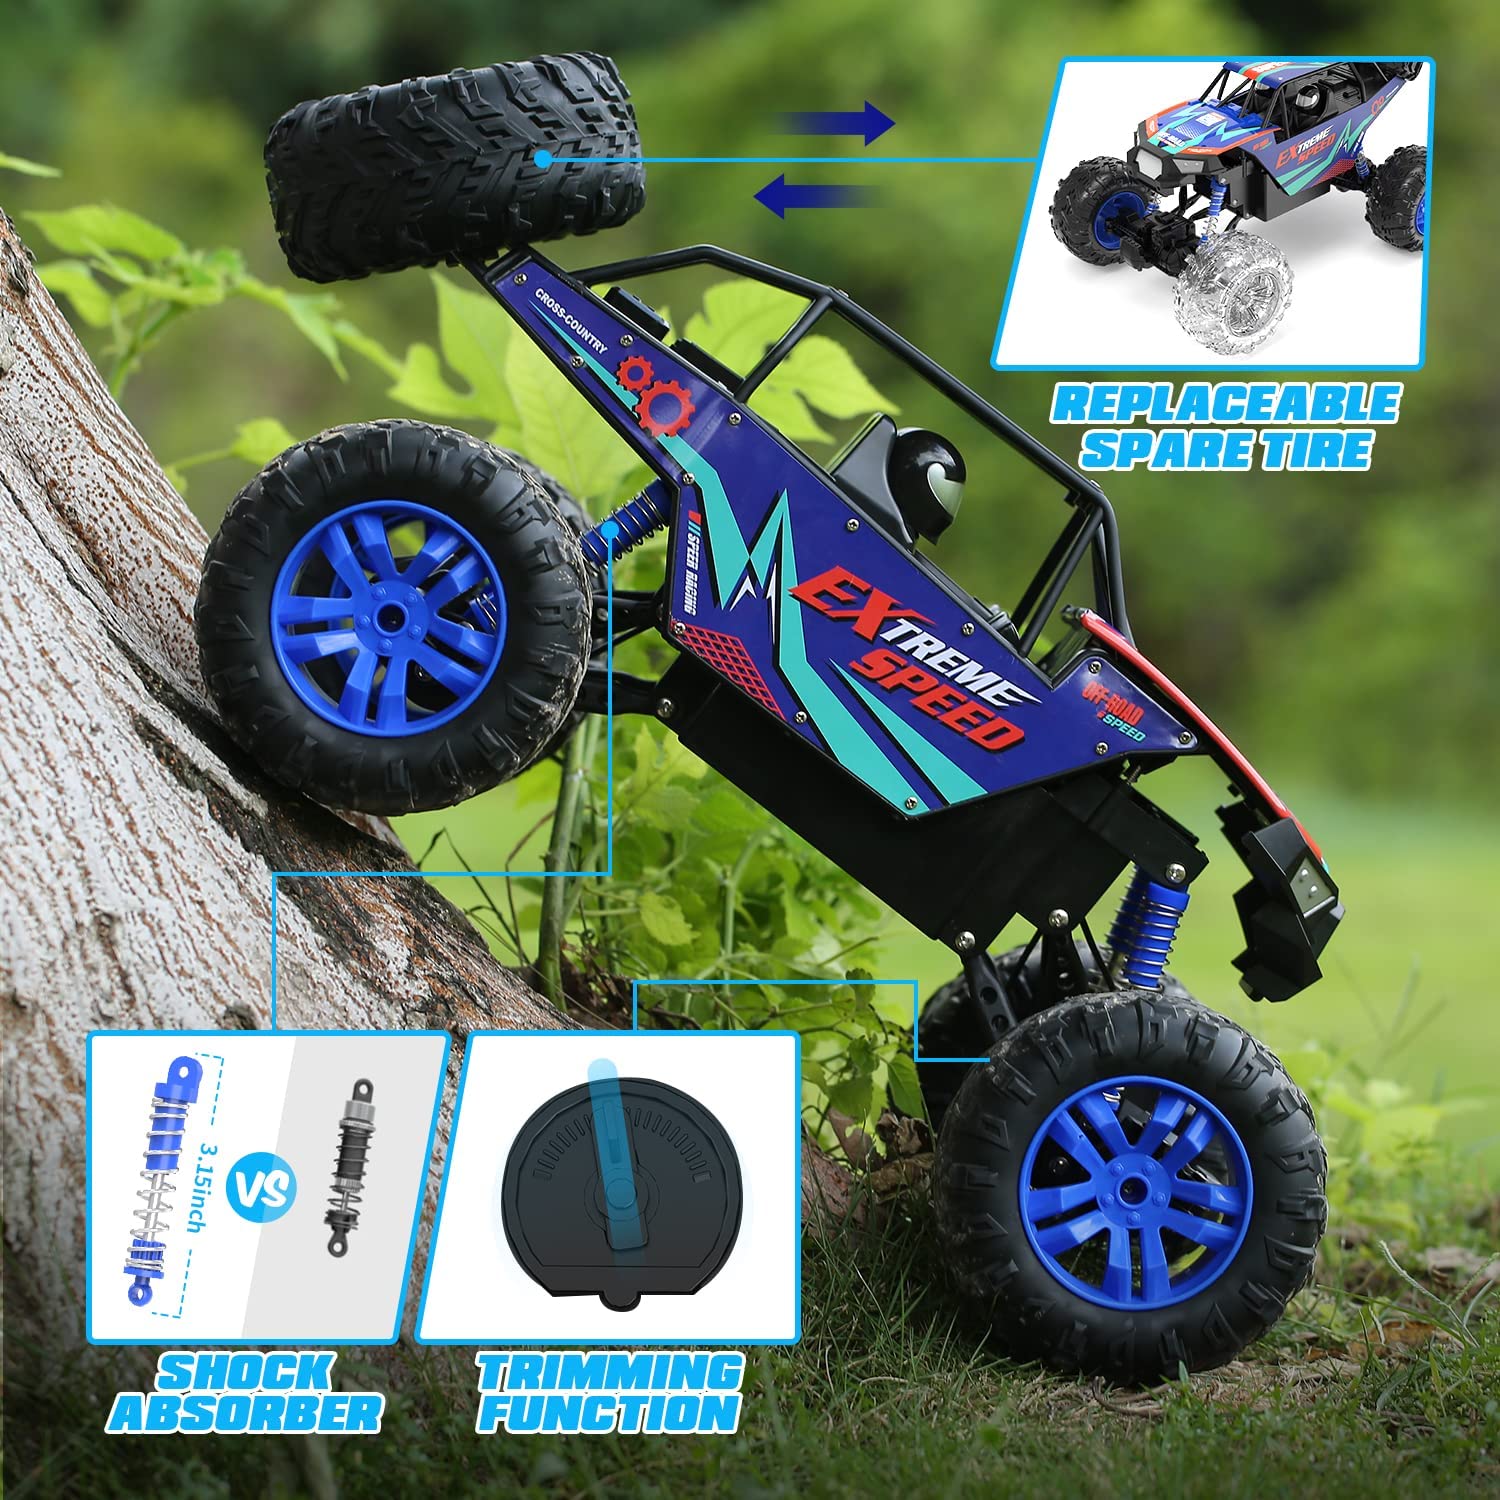 DEERC DE60 Large 1:8 Scale Upgraded RC Cars Remote Control Car for Adults Boys,Off Road Monster Truck with Realistic Sound,2.4Ghz 4WD Rock Crawler Toy All Terrain Climbing,2 Batteries for 80 Min Play